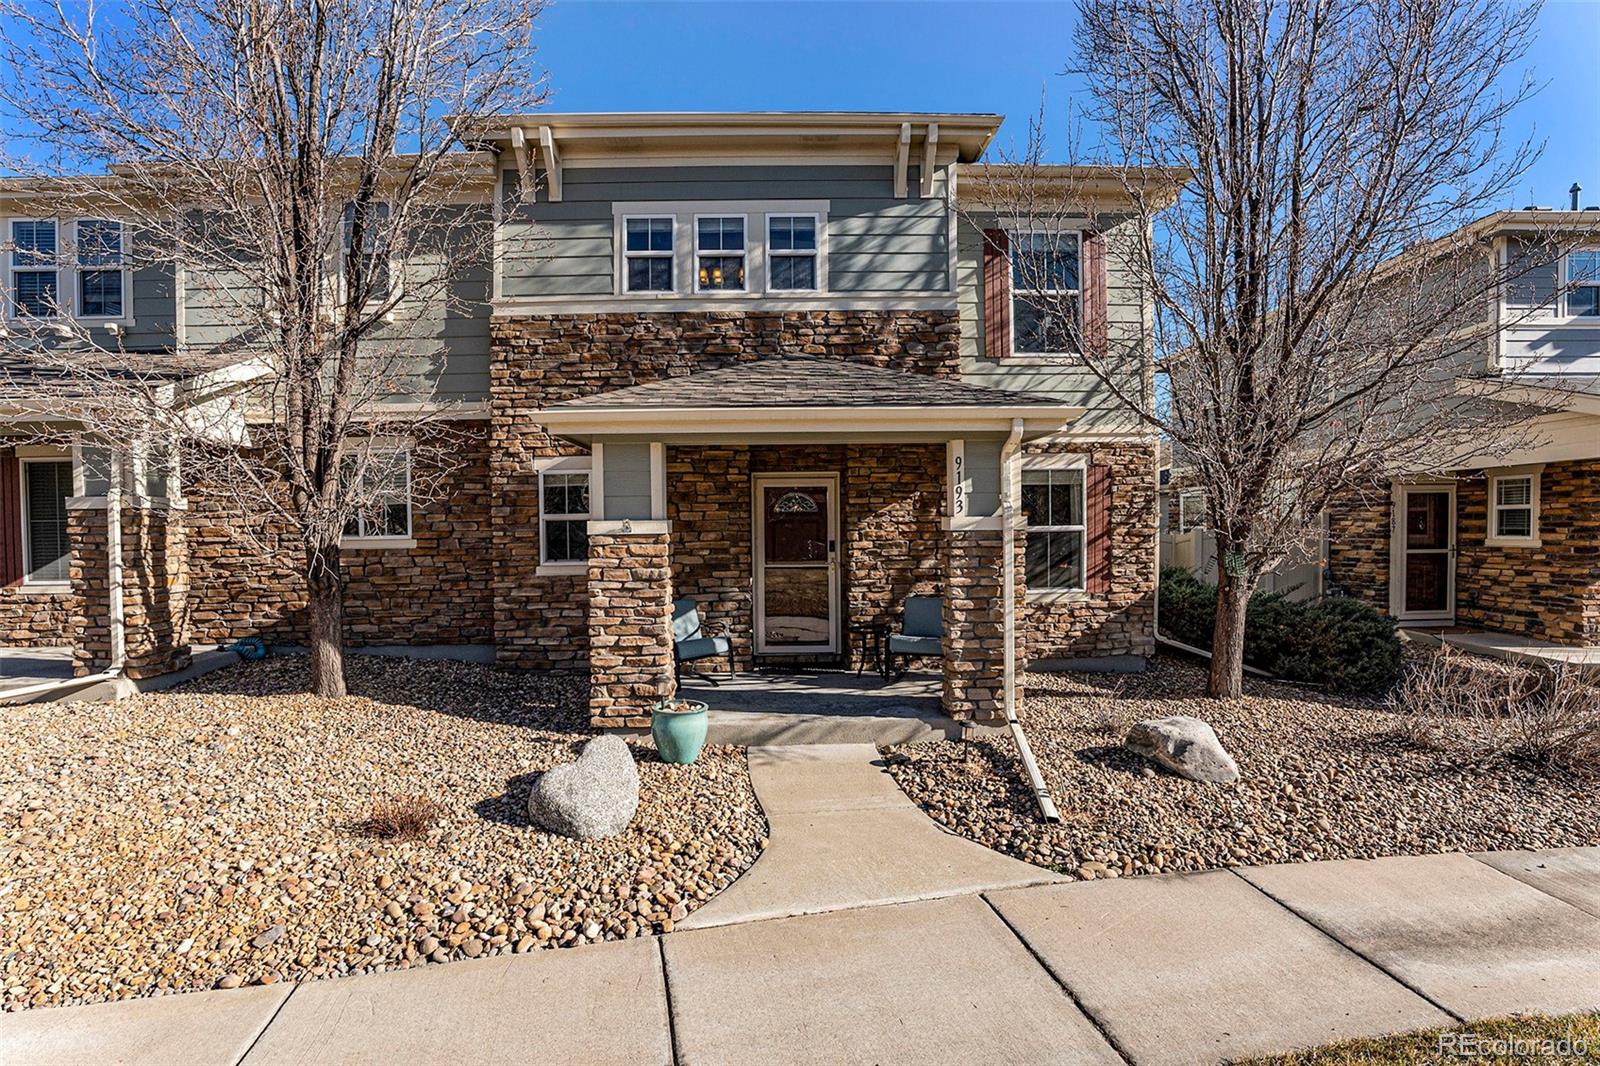 Report Image for 9193 W 104th Circle,Westminster, Colorado